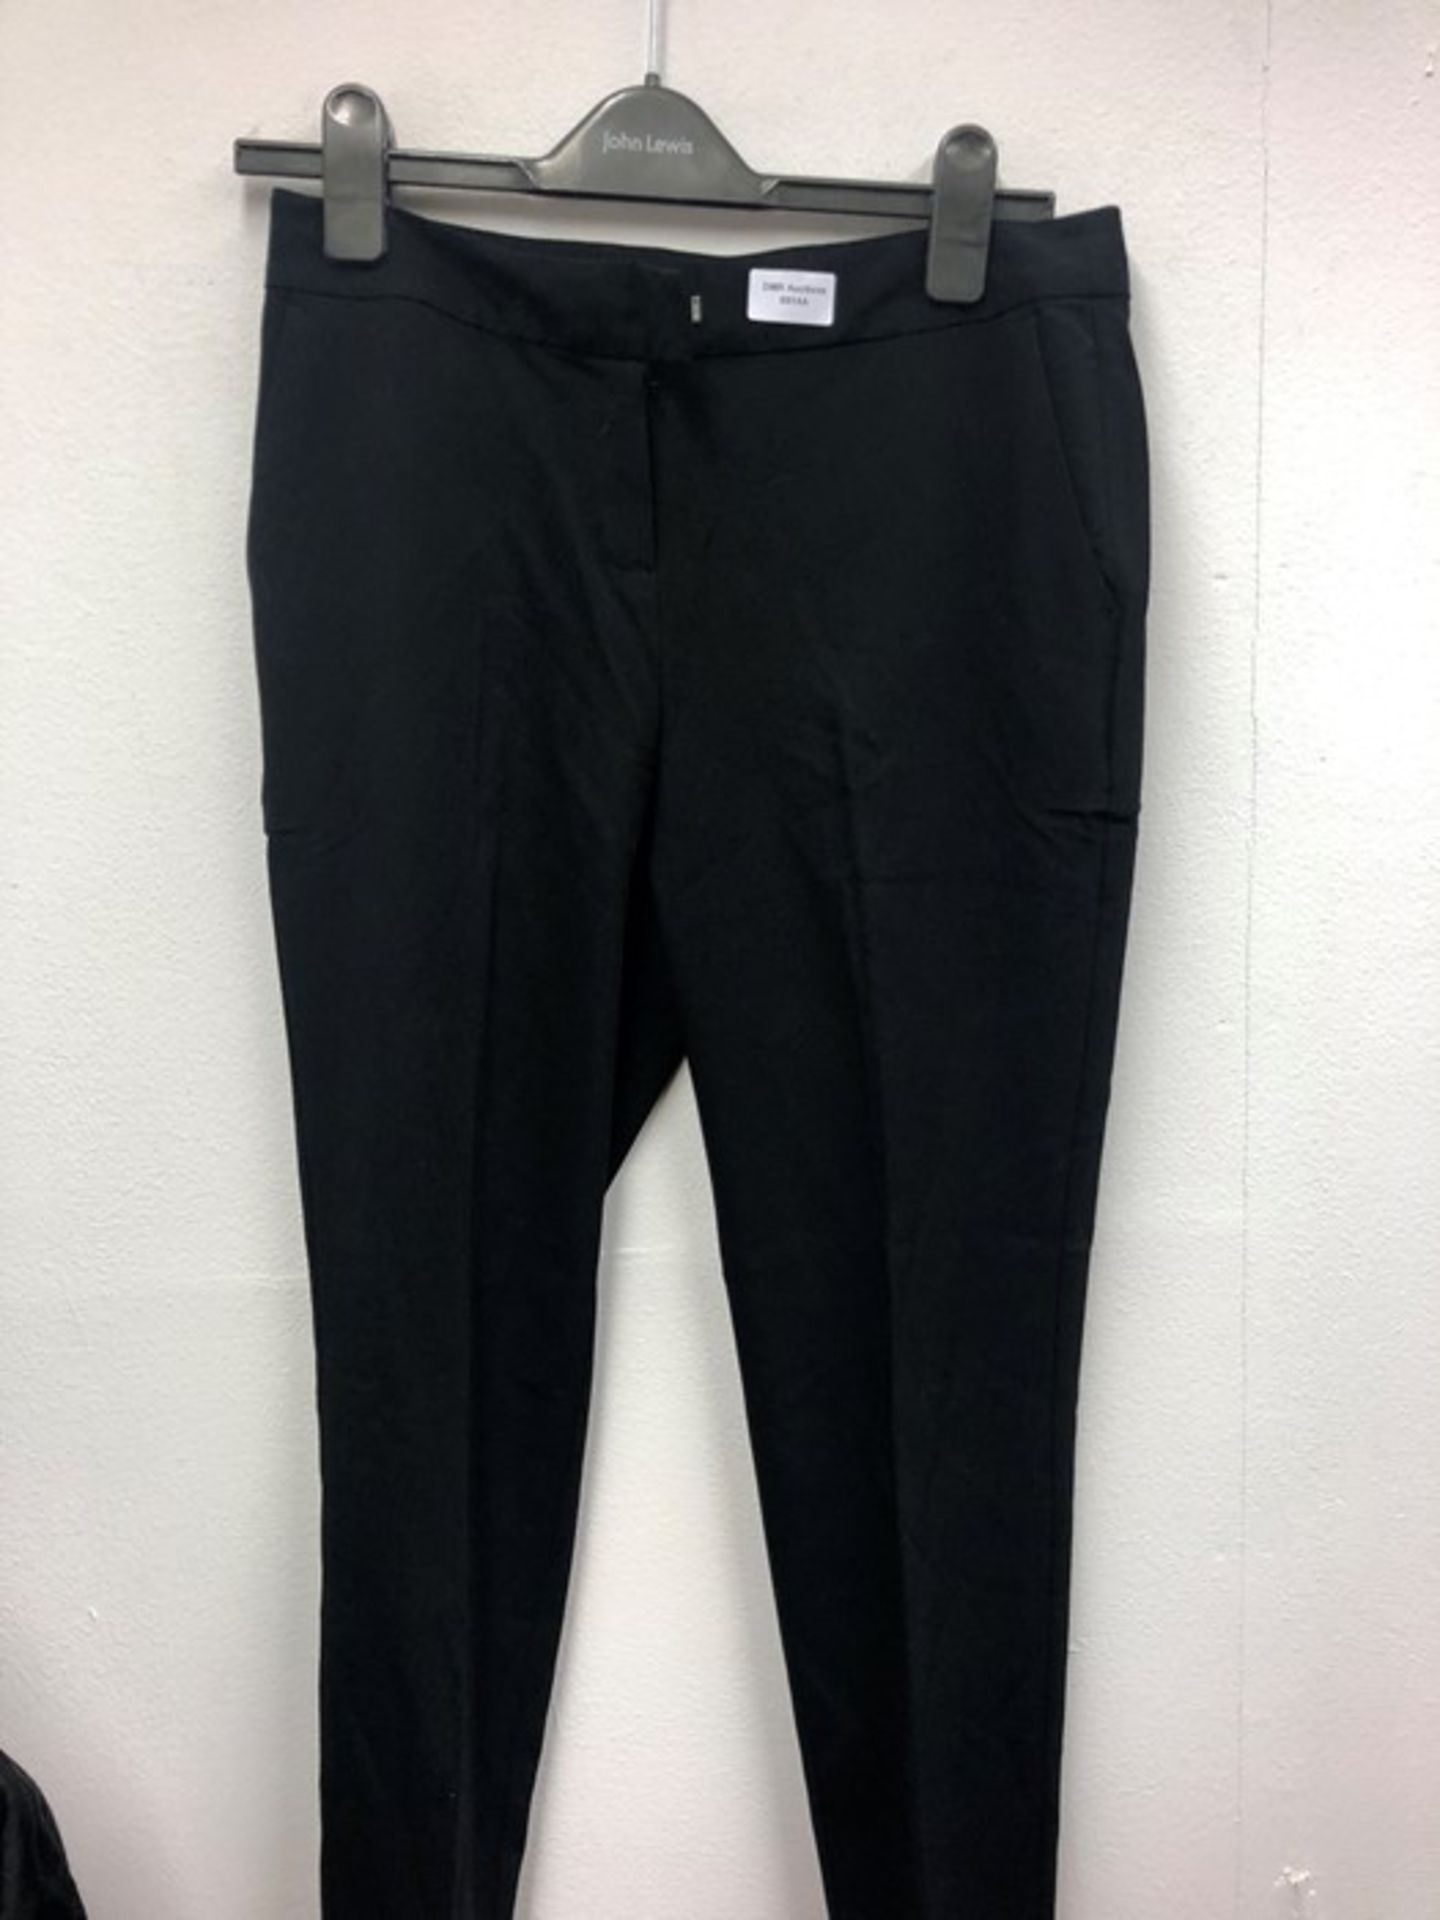 1 AS NEW PAIR OF LA REDOUTE BLACK PANTS SIZE 10 (V